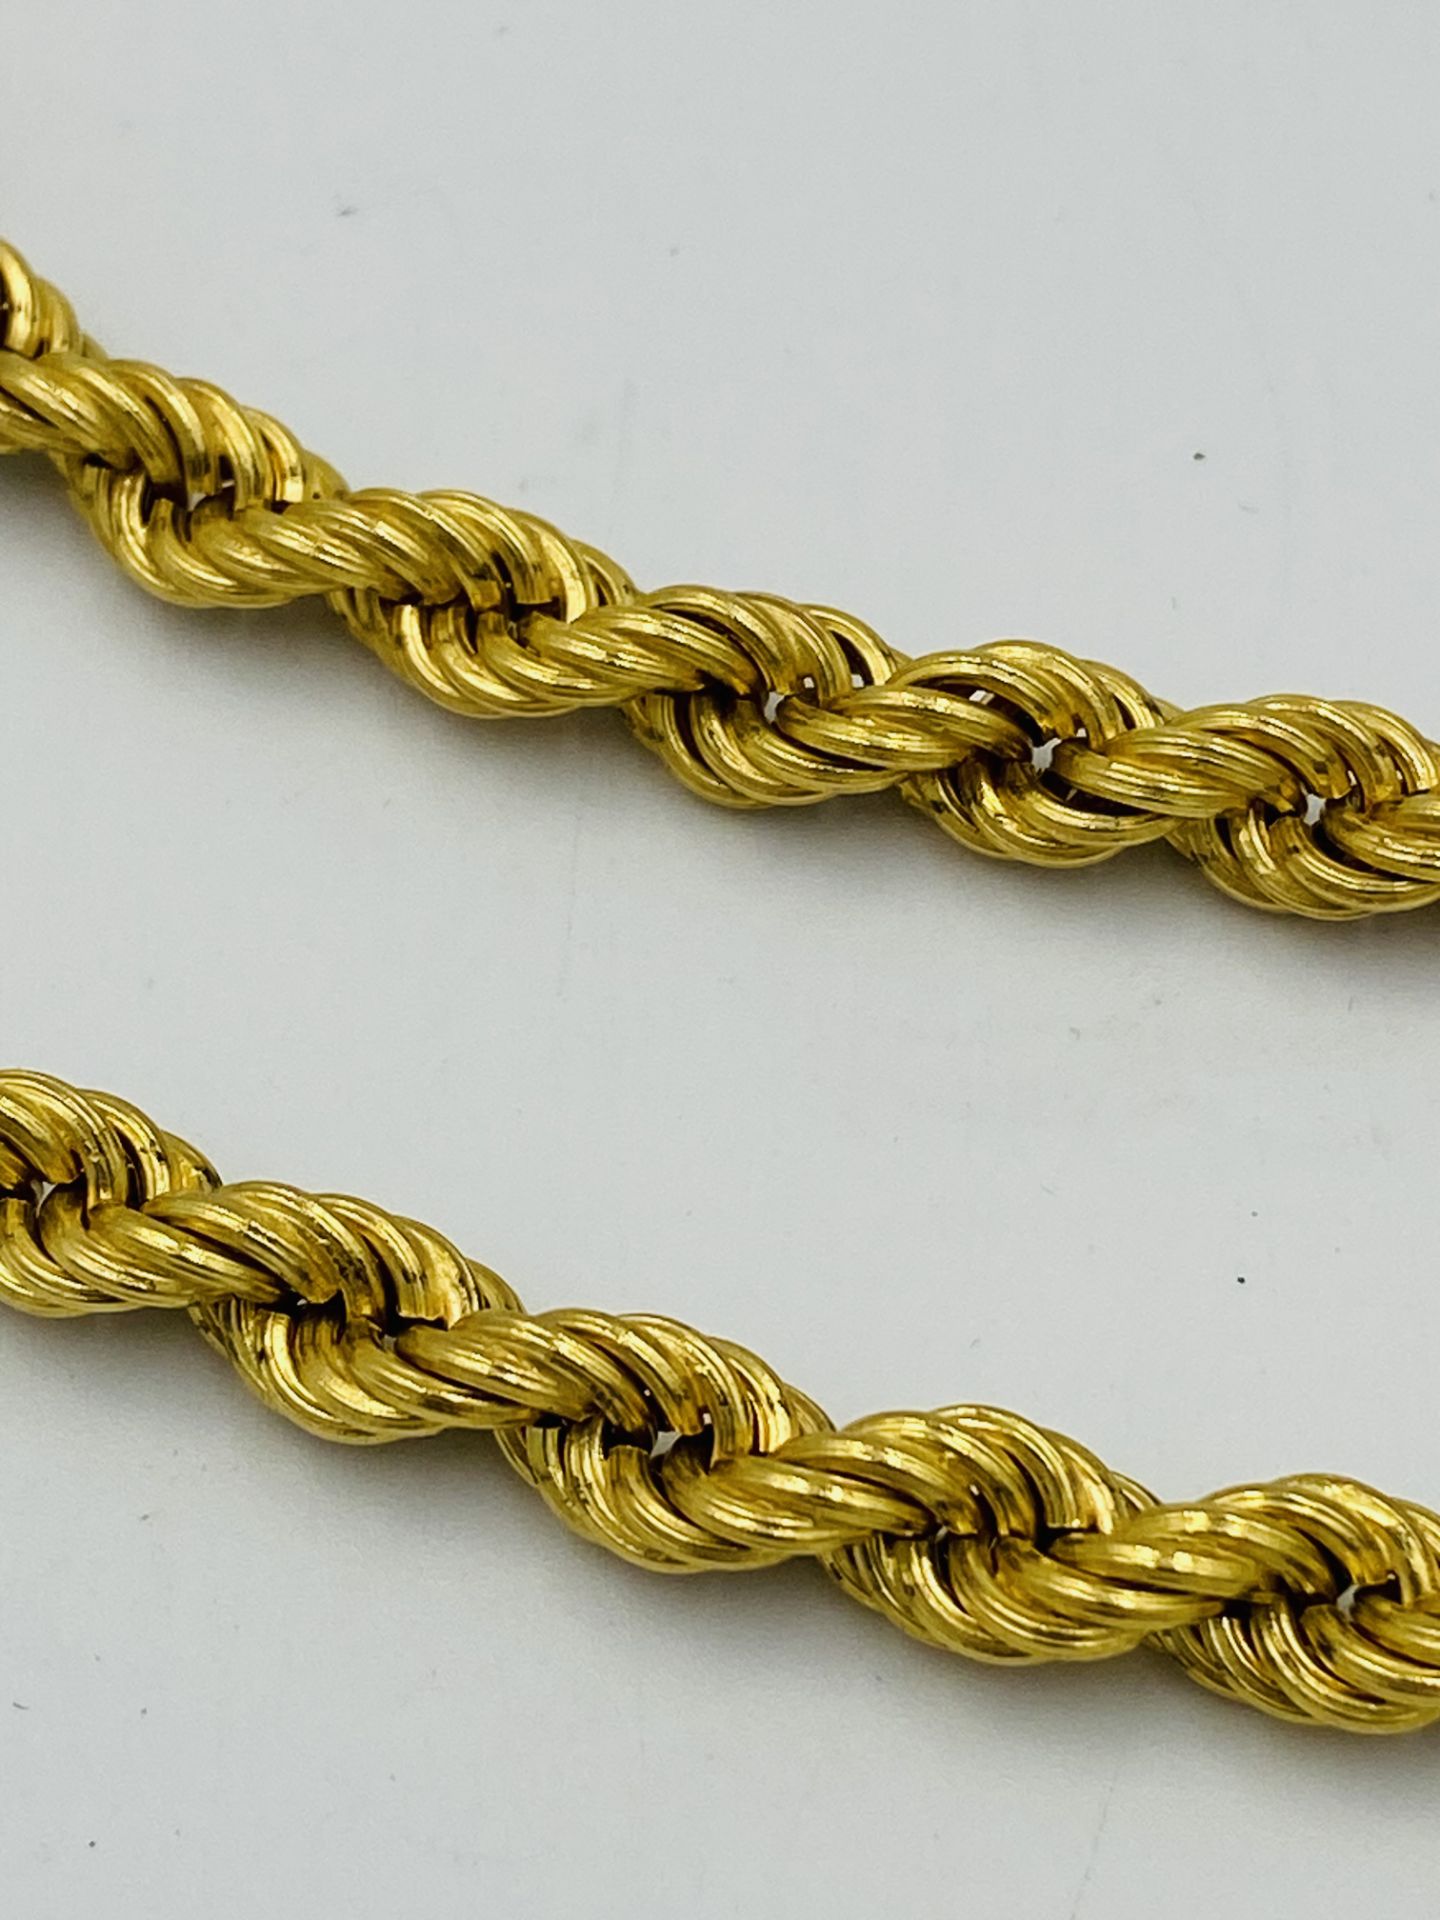 18ct gold rope twist necklace - Image 5 of 5